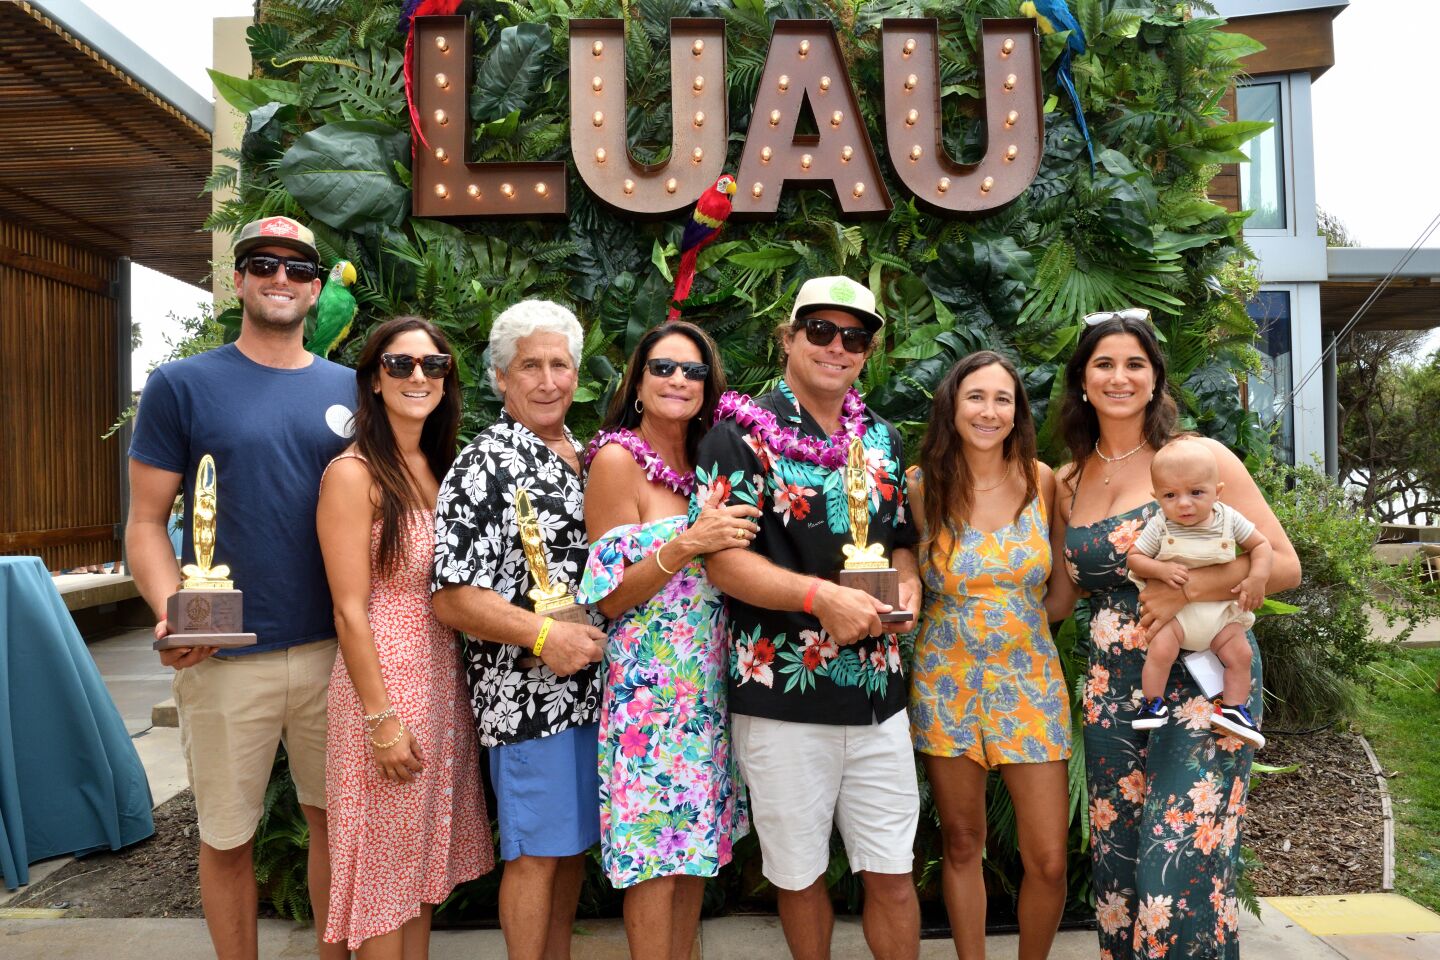 Mason and Allie Derieux, Fred and Nancy Borrelli, Josh and Torie Hall, Bettina Borrelli and baby Cardon Hall show their island style at the Luau & Legends of Surfing Invitational on Aug. 21.